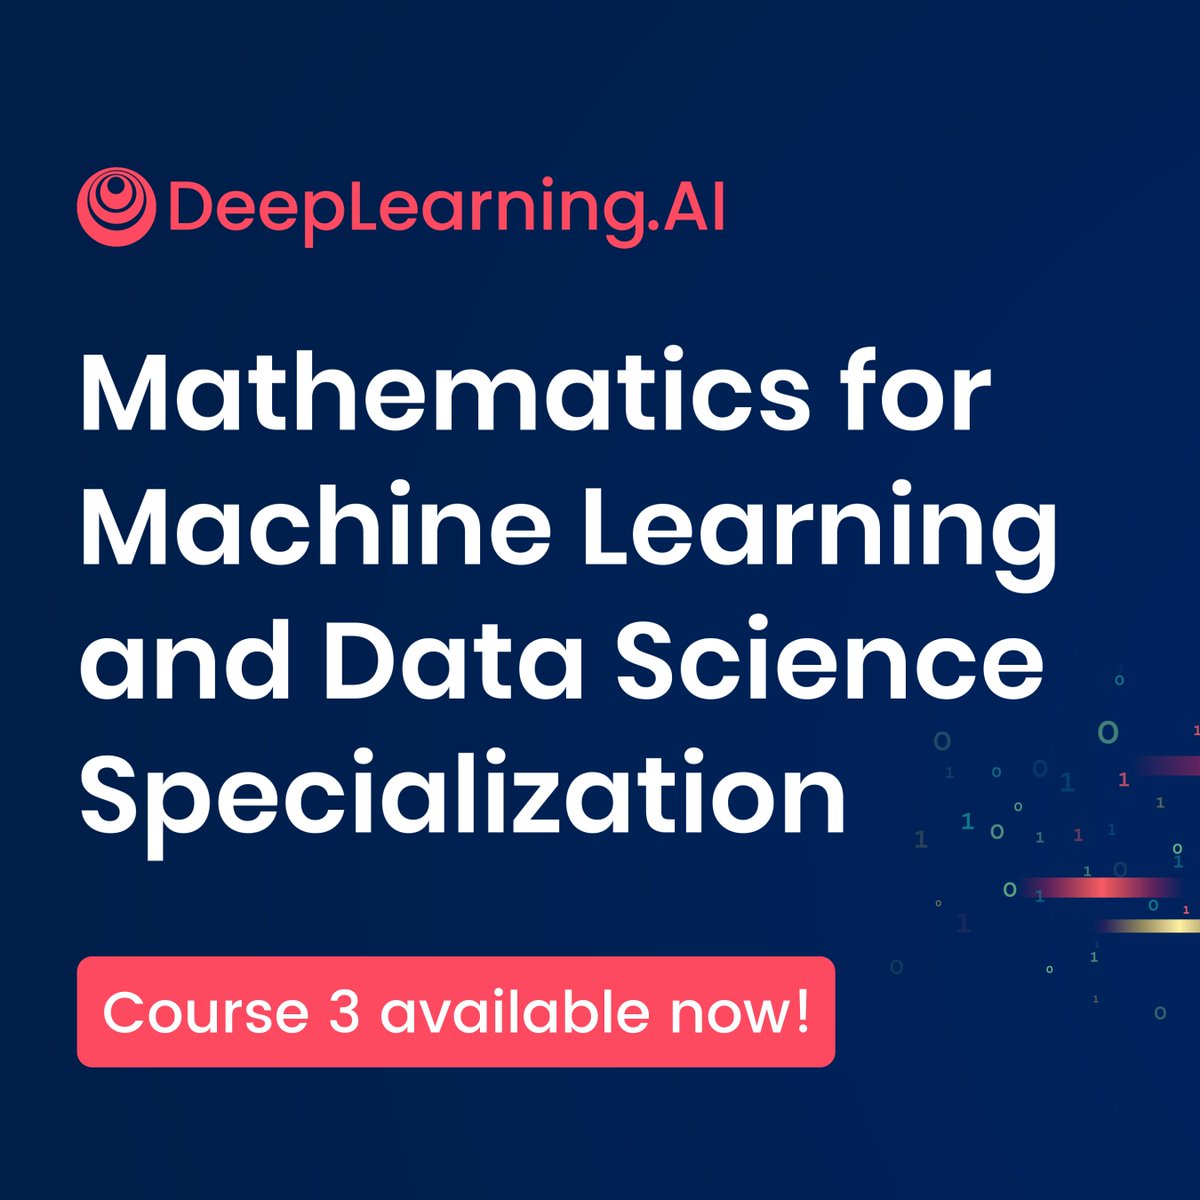 Probability and statistics are great skills for any AI practitioner looking to upskill. With @SerranoAcademy you’ll develop a strong foundation in both in course 3 of the Machine Learning and Data Science Specialization, available now! 

Enroll now: hubs.la/Q01S1Htm0